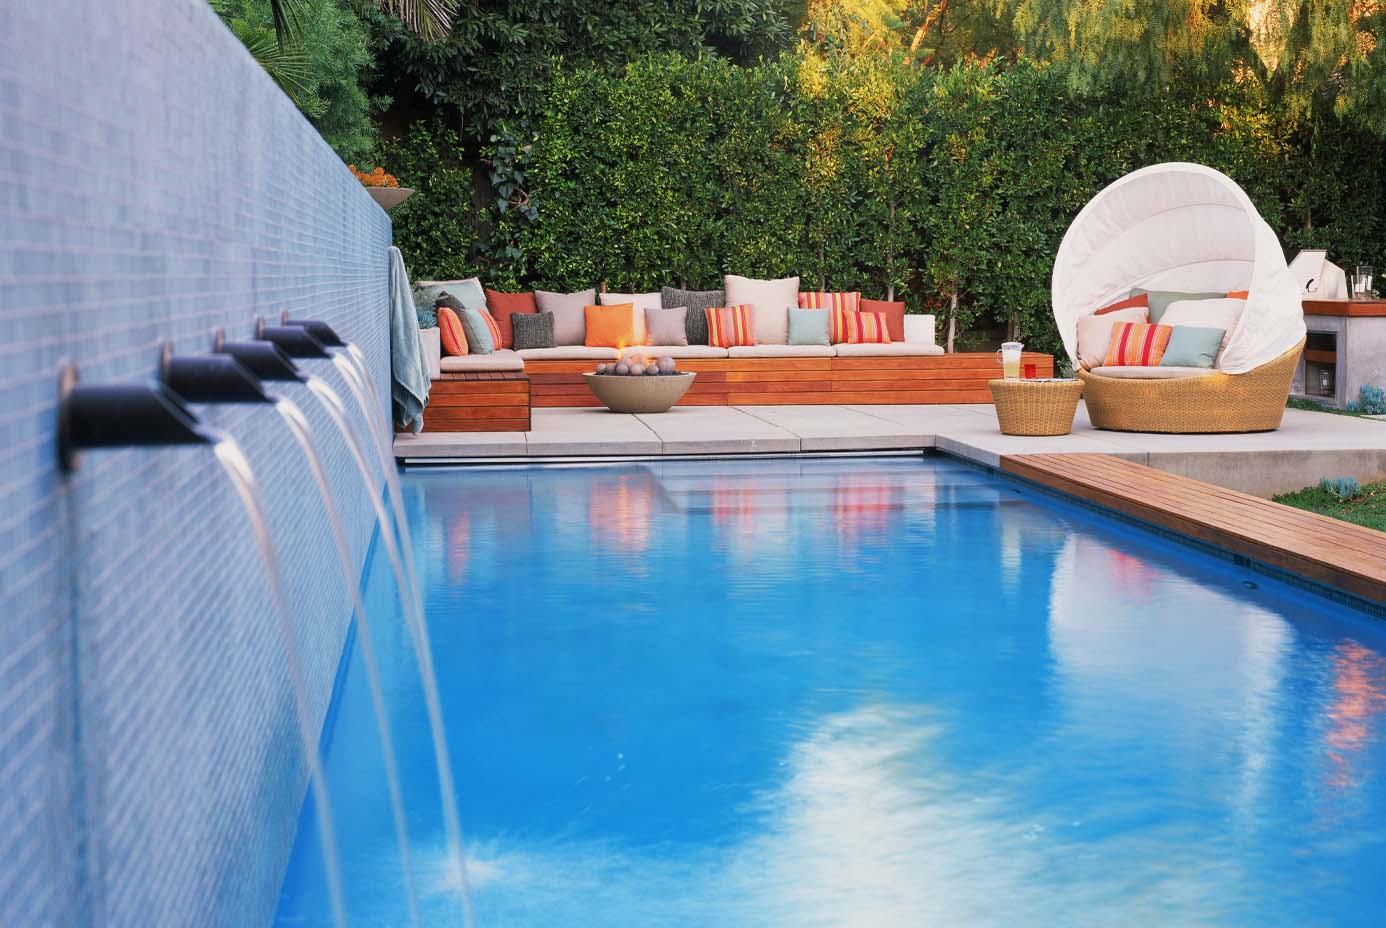 Pool: A modern twist on a classic pool feature, bronze spouts provide fountain-like sound of cascading water.